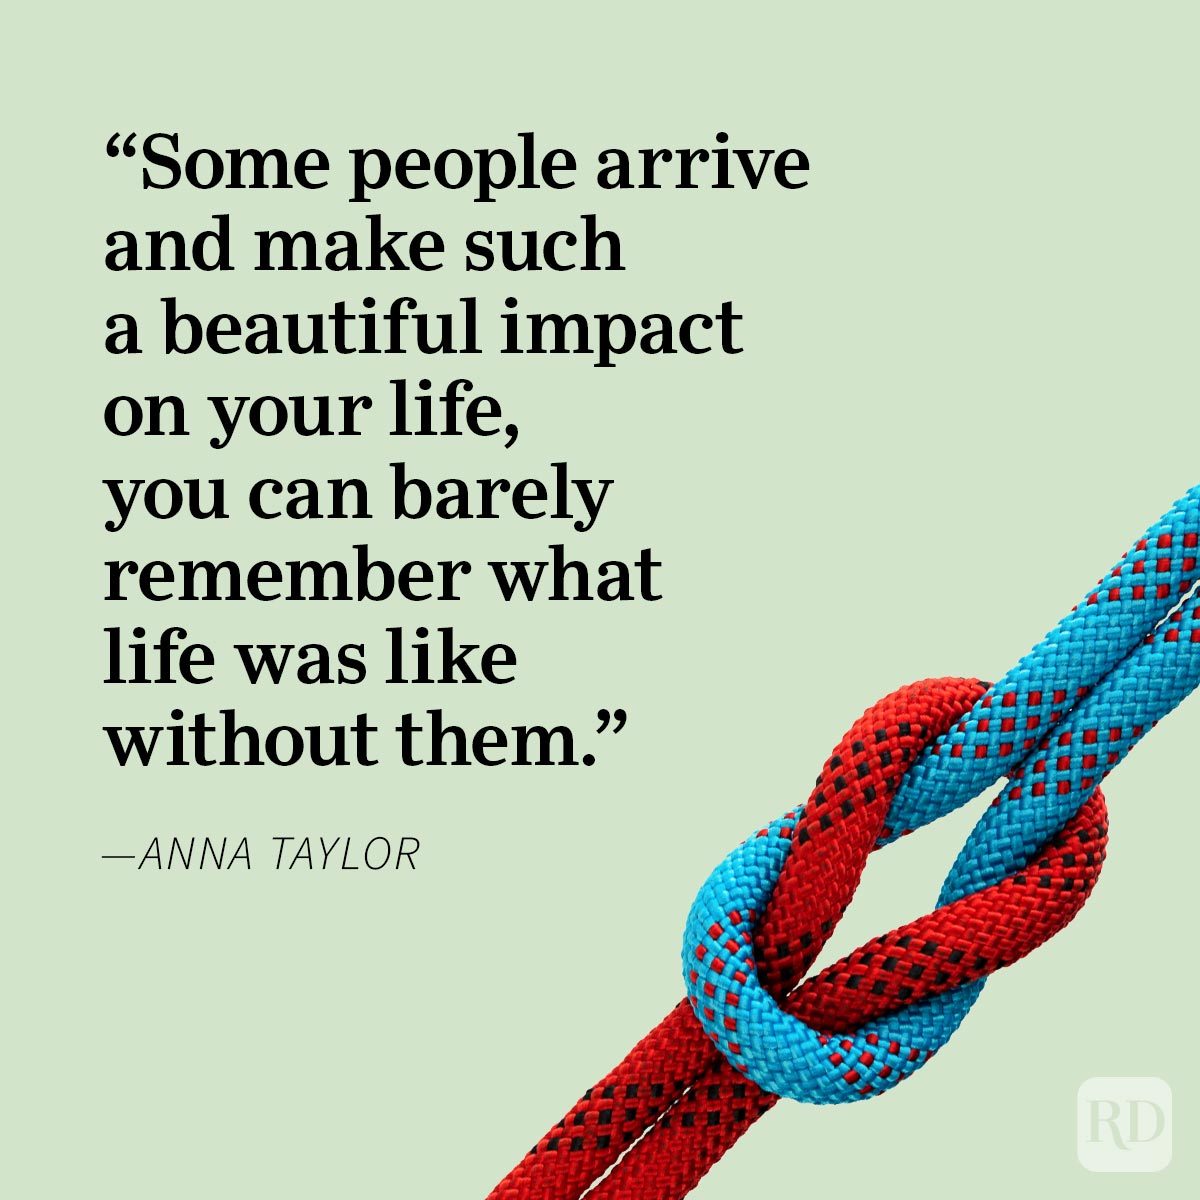 Friendship Quotes To Share With Your Bestie Anna Taylor, red and blue roped tied knotted, green